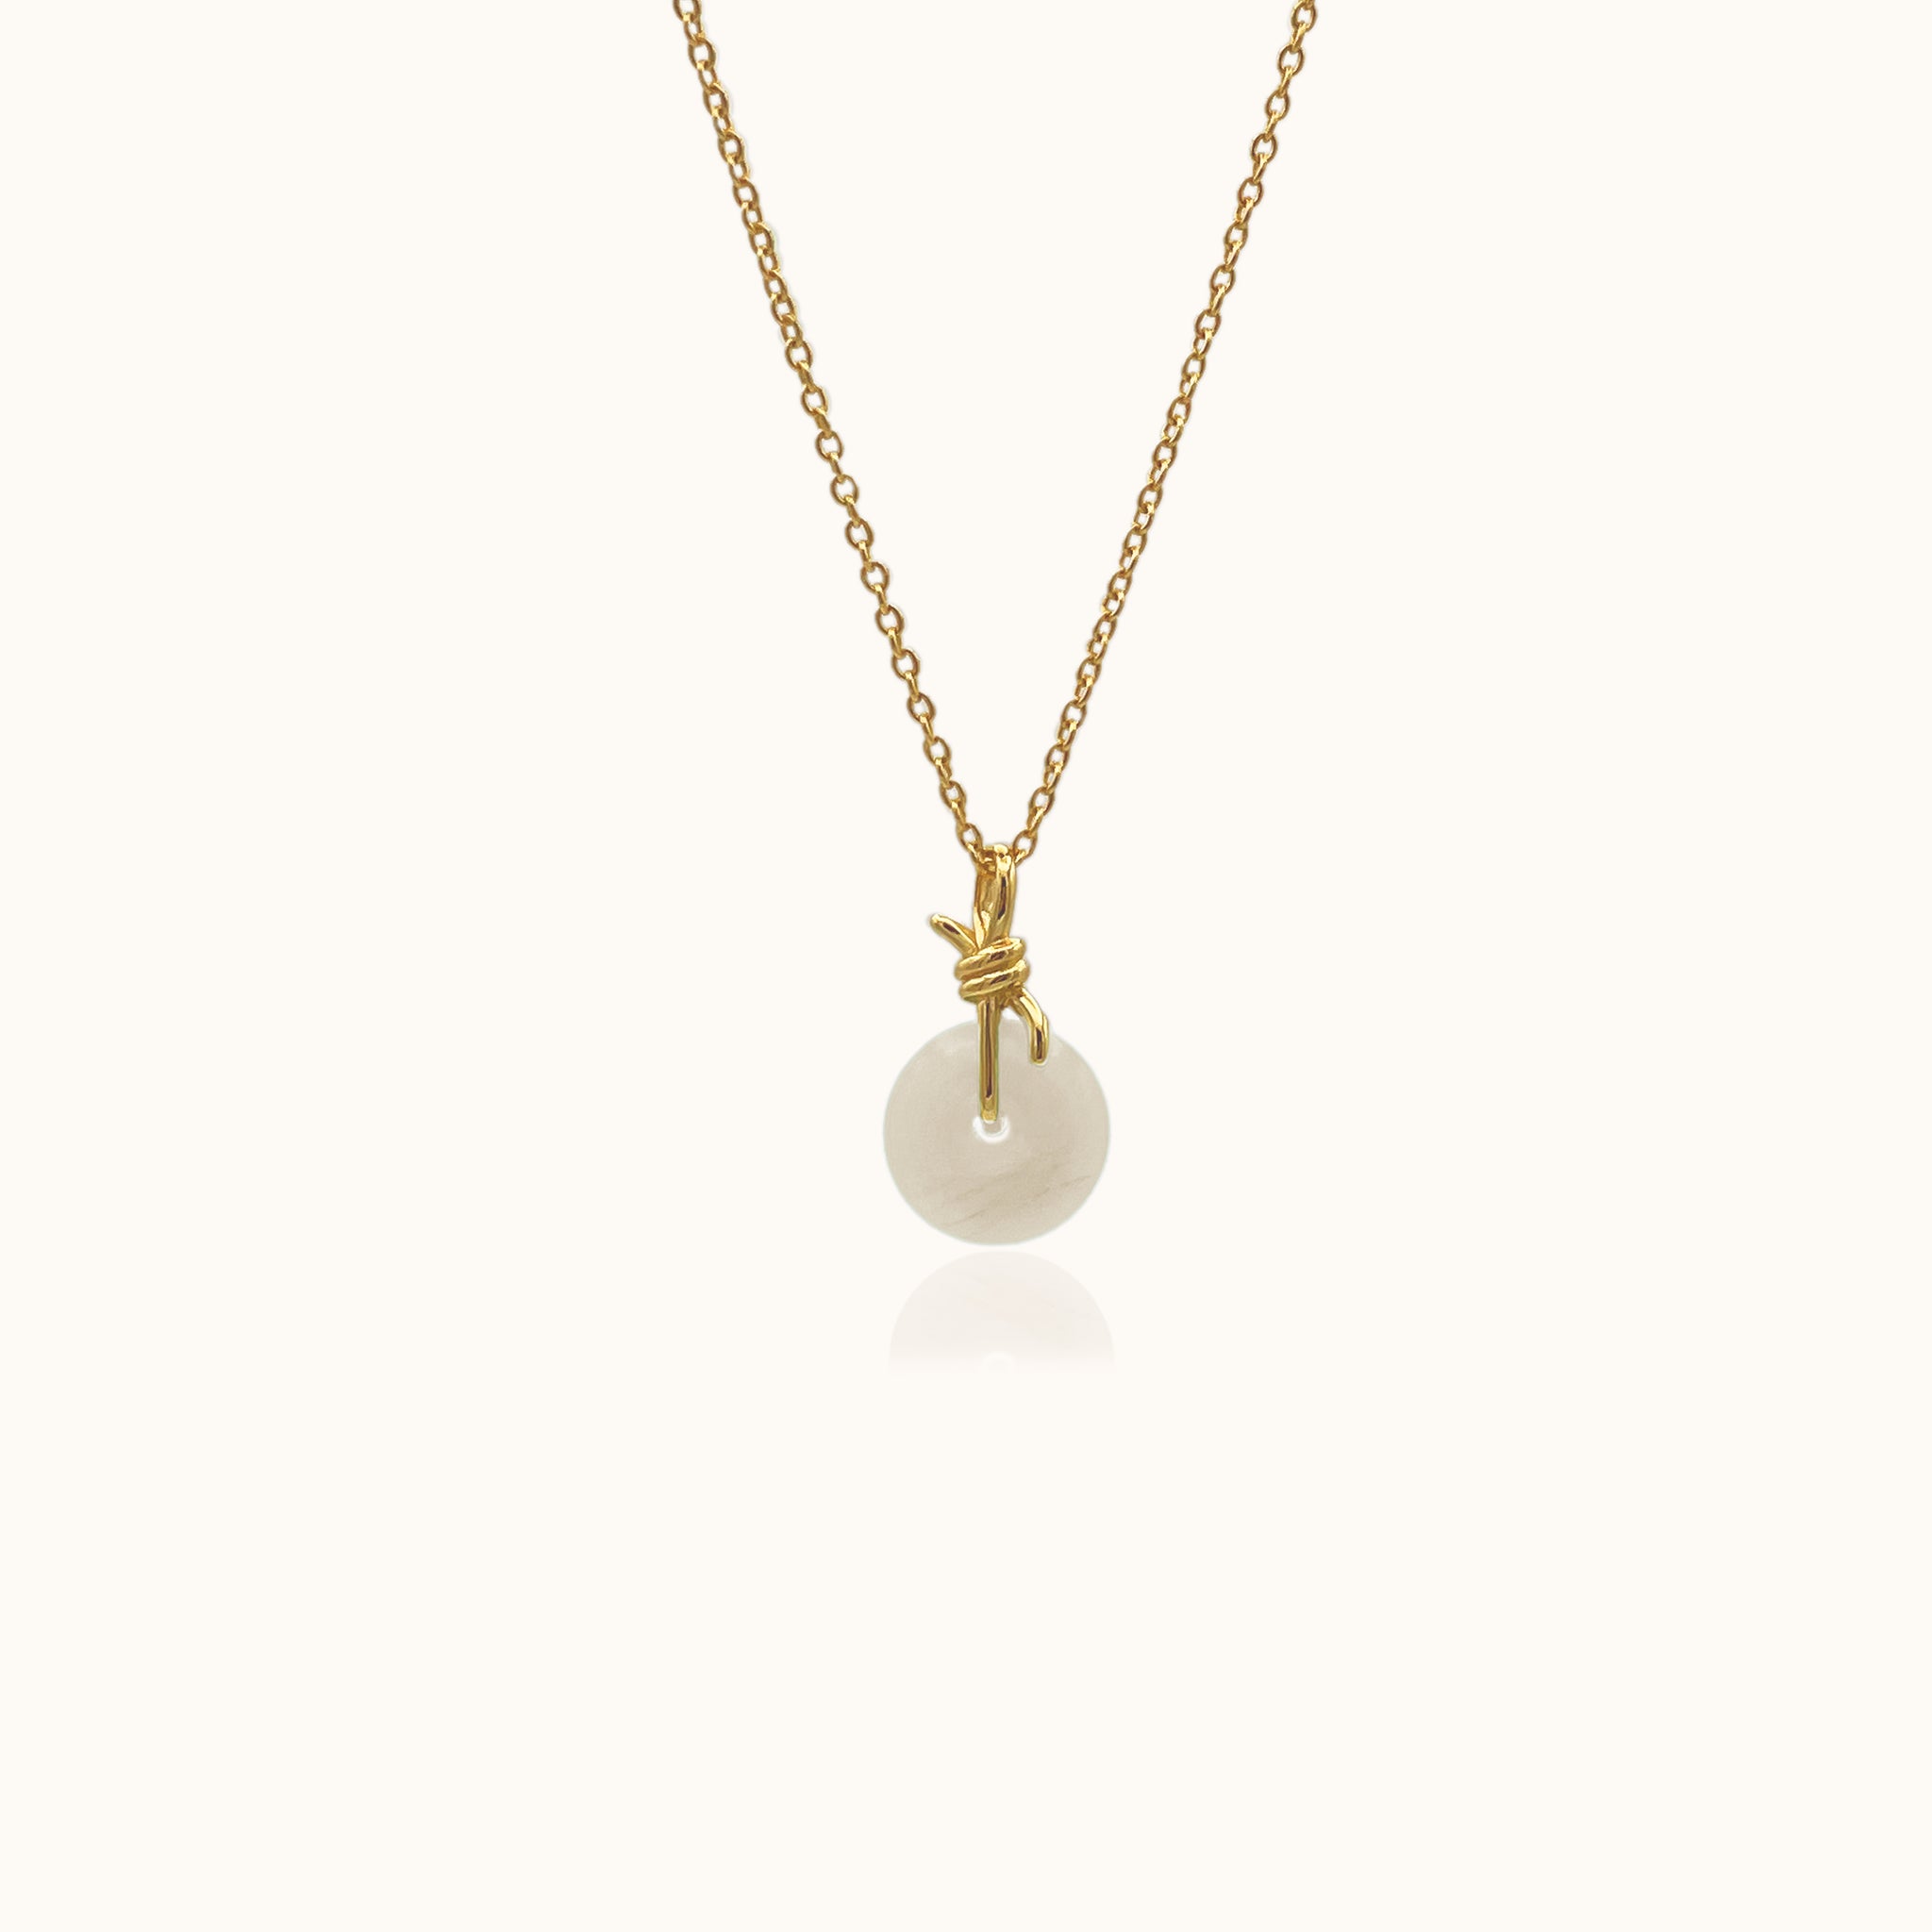 Love Knot Necklace with Beautiful White Jade Natural Genuine Real Jade with Gold Chain by Doviana